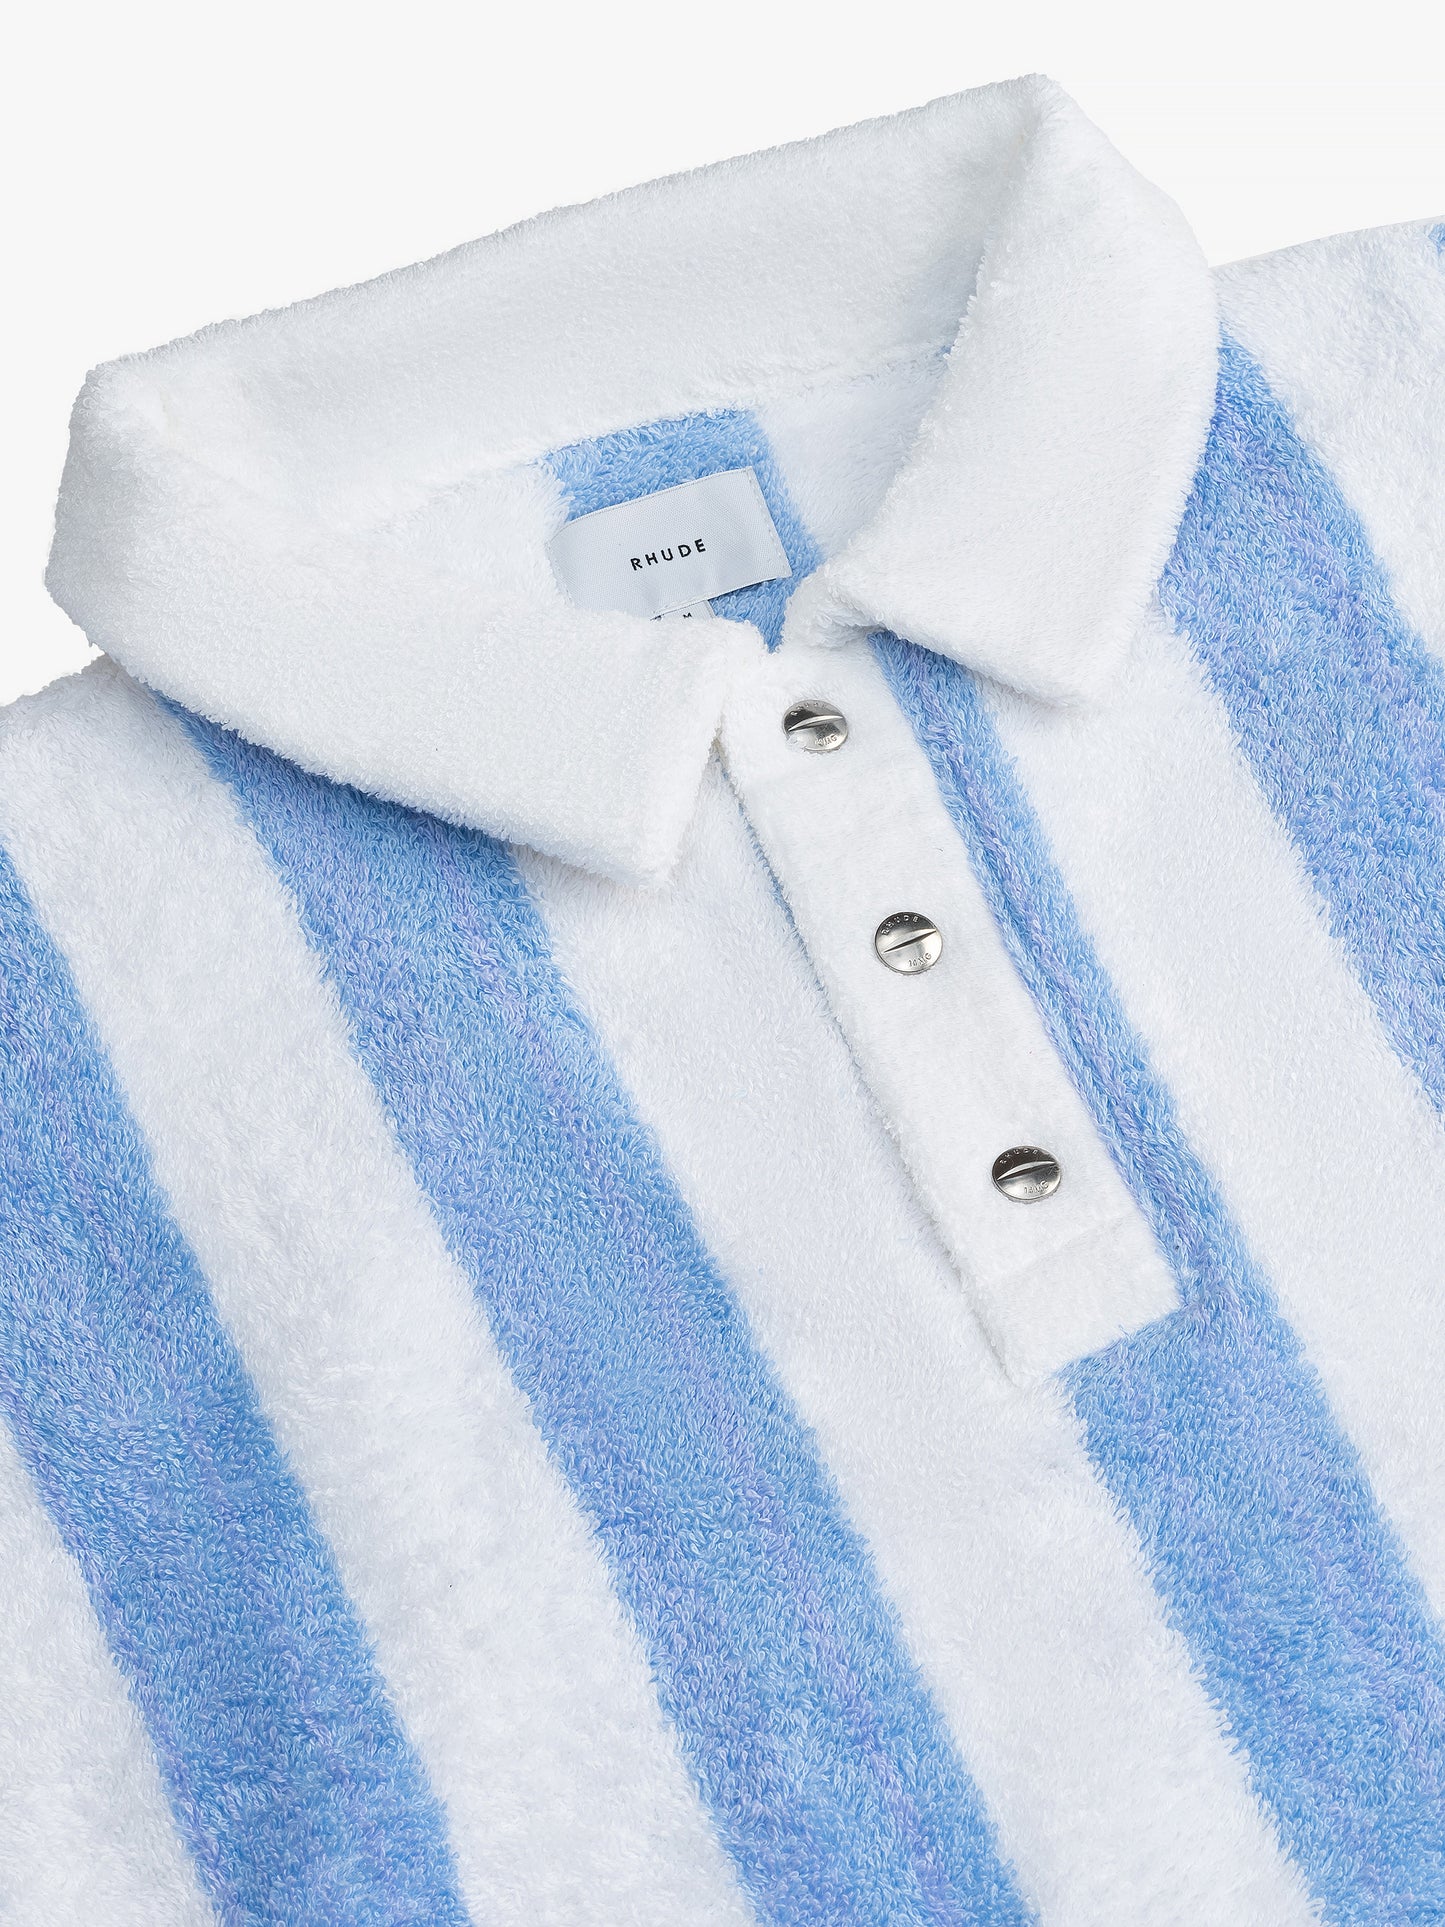 STRIPED LOOP TERRY POLO